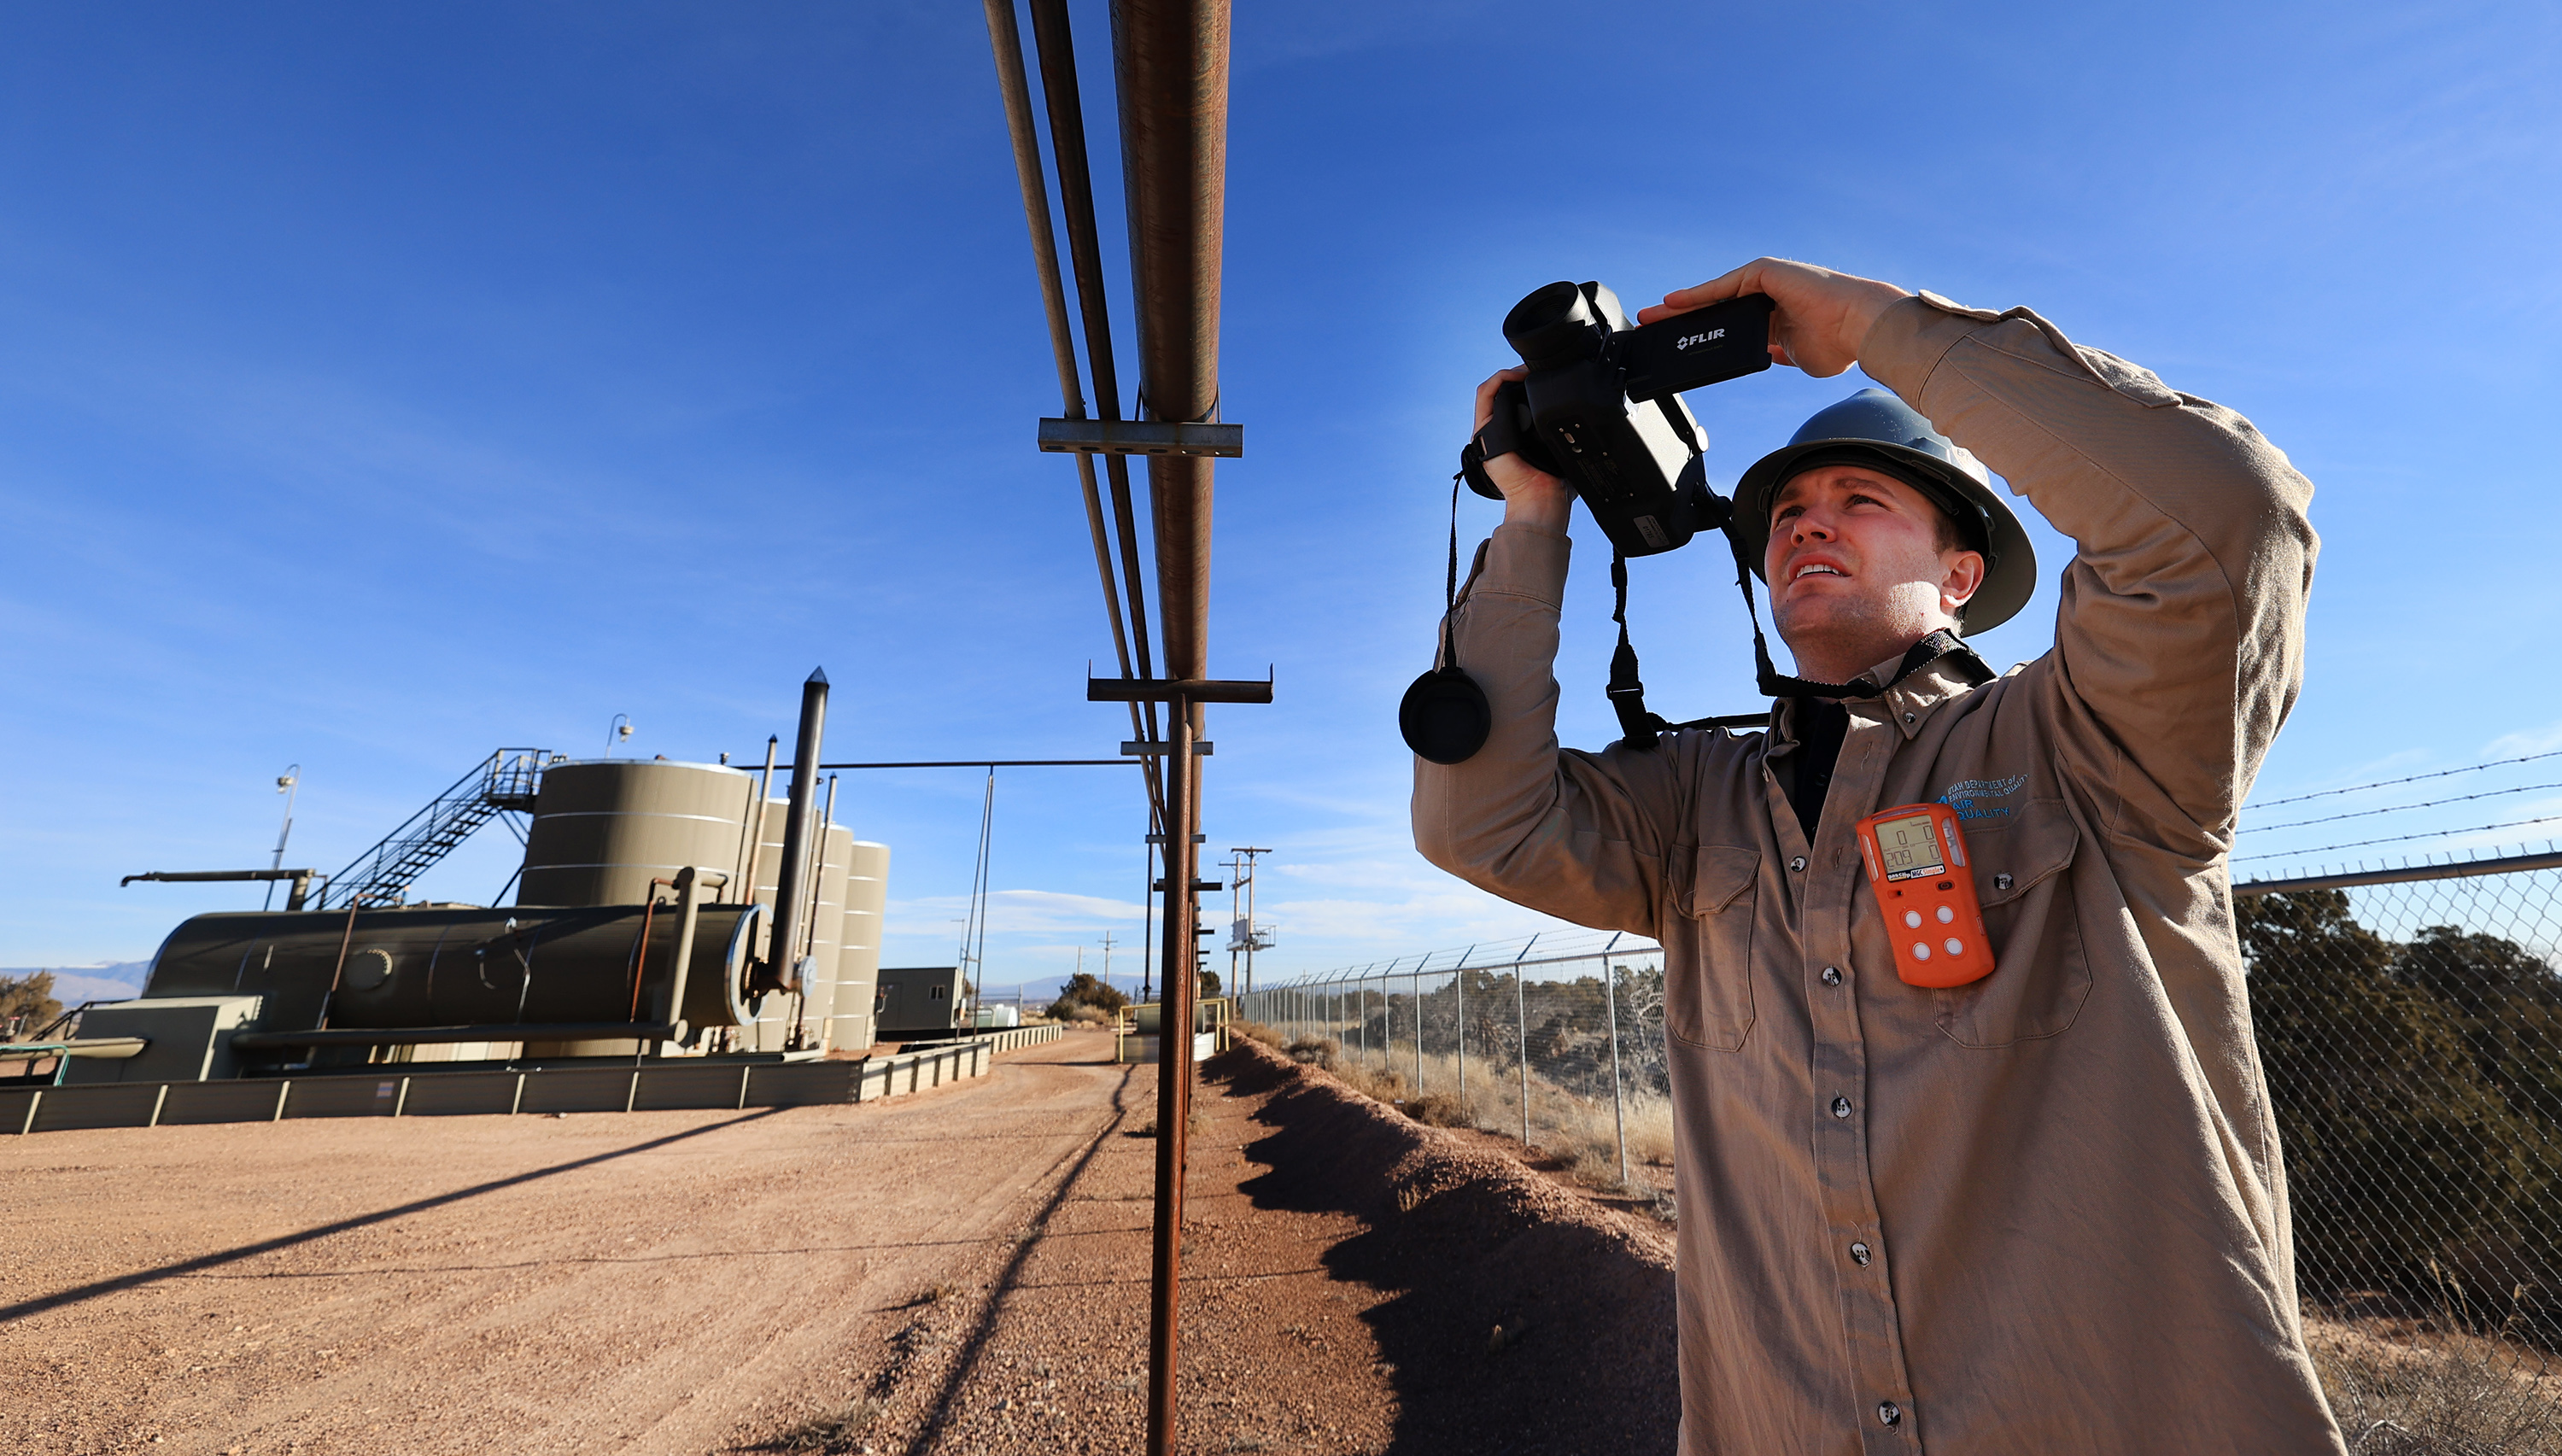 Stephen Foulger, an environmental scientist with the Utah Department of Environmental Quality, uses a Flir gas detection camera to look at welded joints on a pipeline during an inspection of an oil pump site near Roosevelt on Wednesday, Dec. 1, 2021.